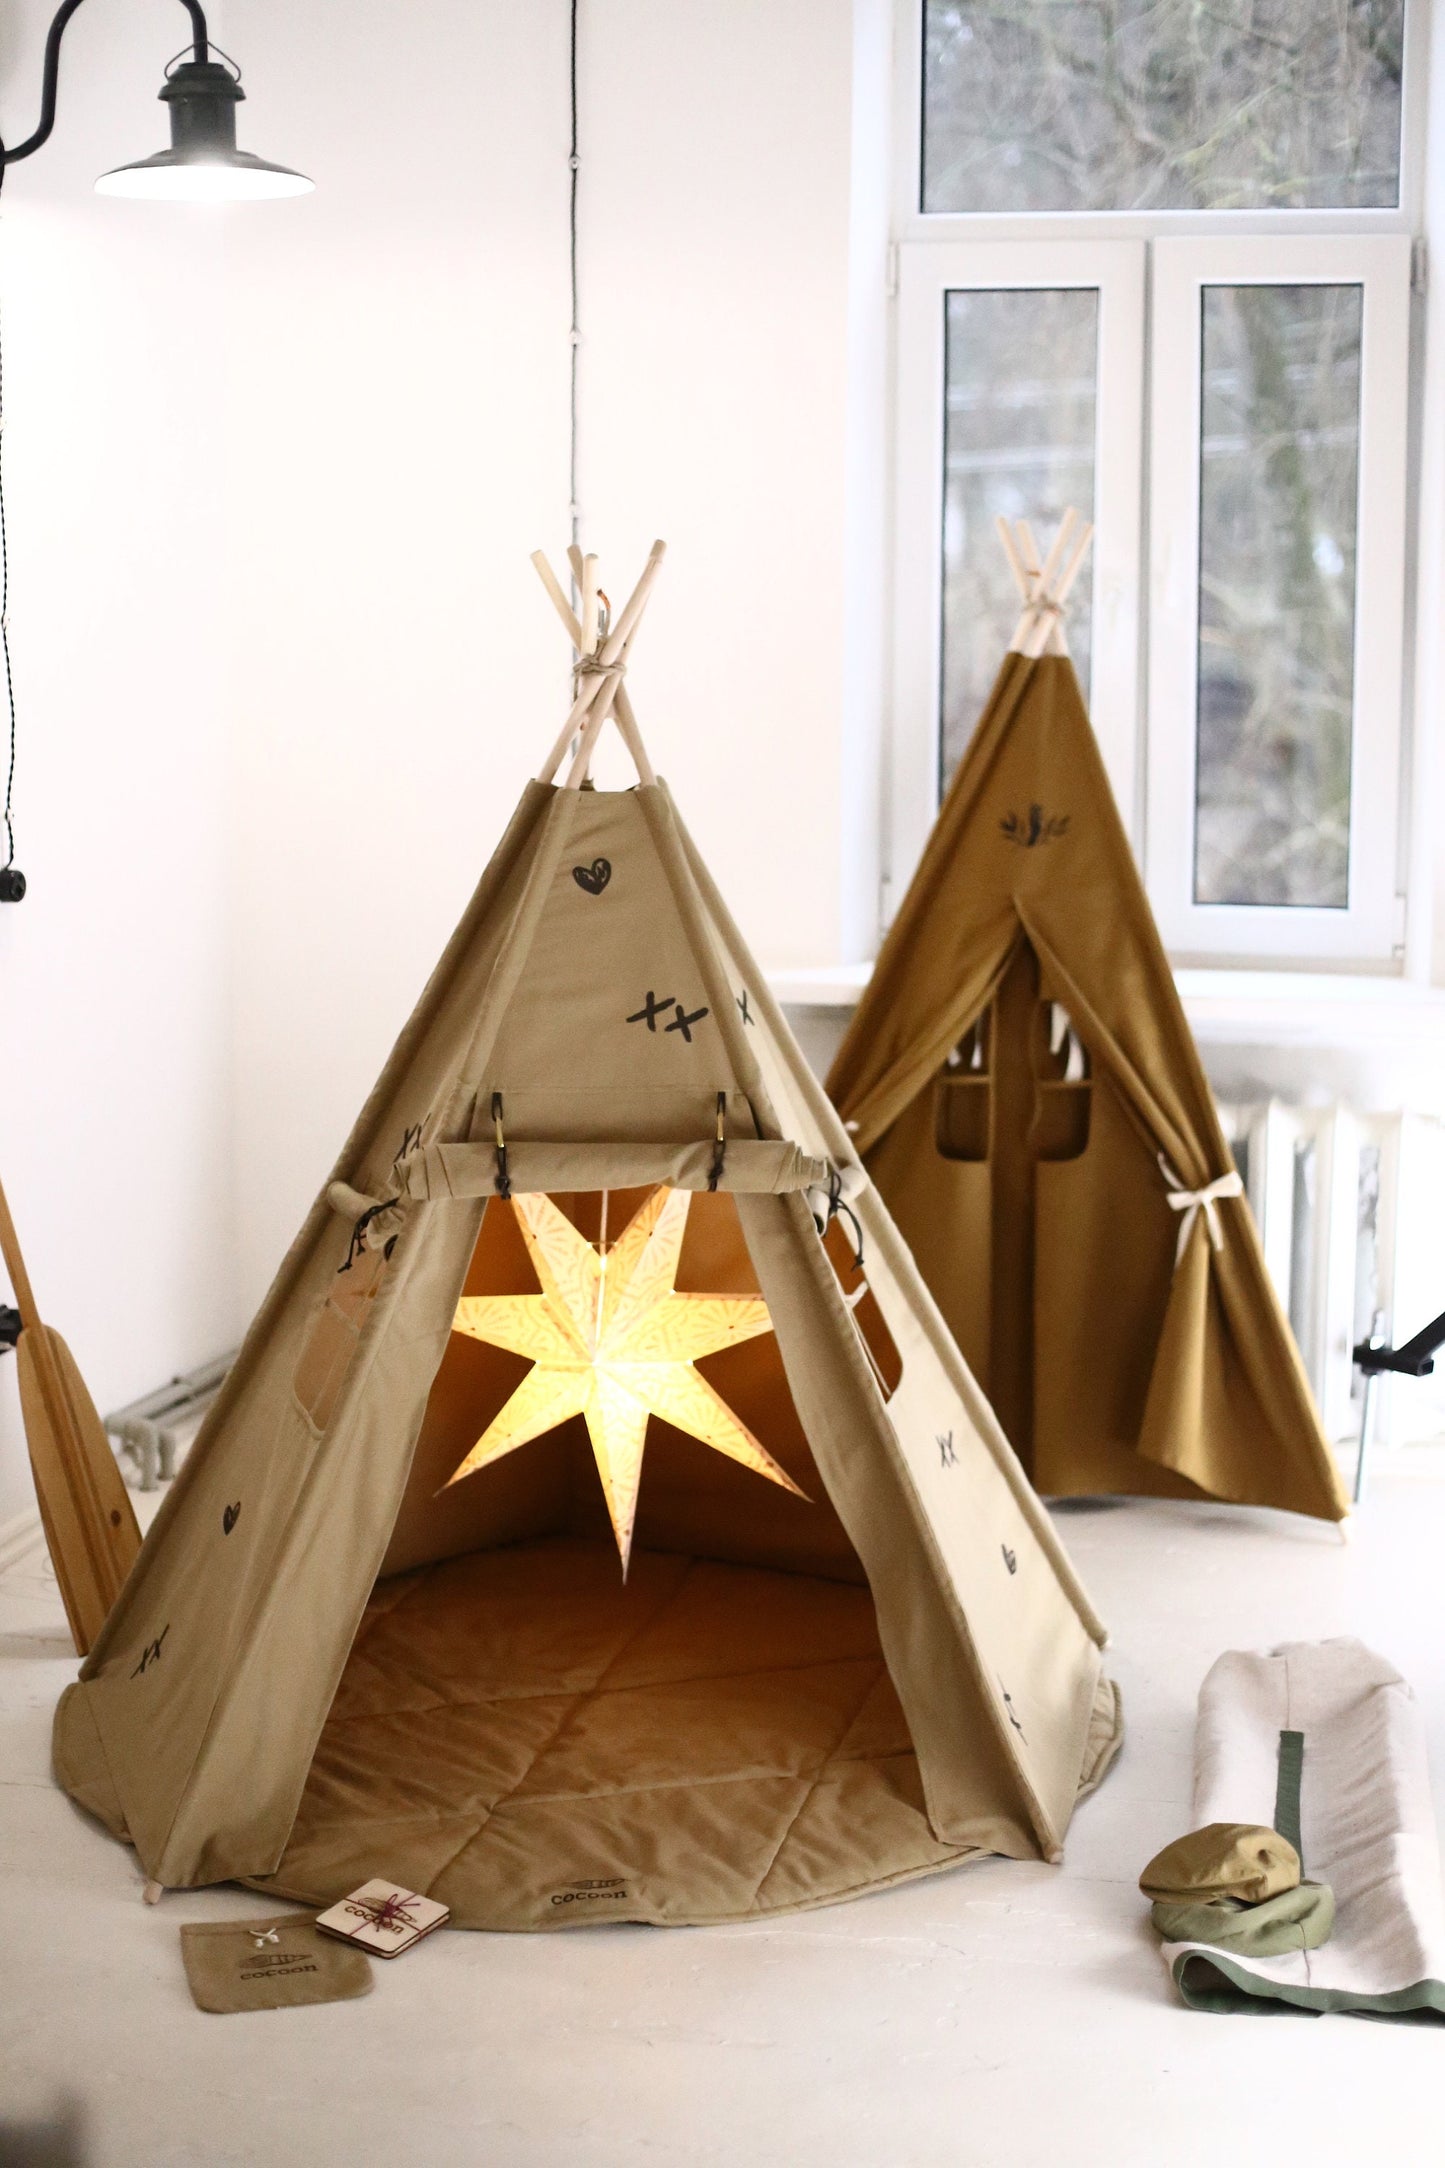 Big Playhouses/Viking Tent/Best Canopy Tent/Tent For Boys Room/Mess Tent/Cool Playhouses - 1st birthday